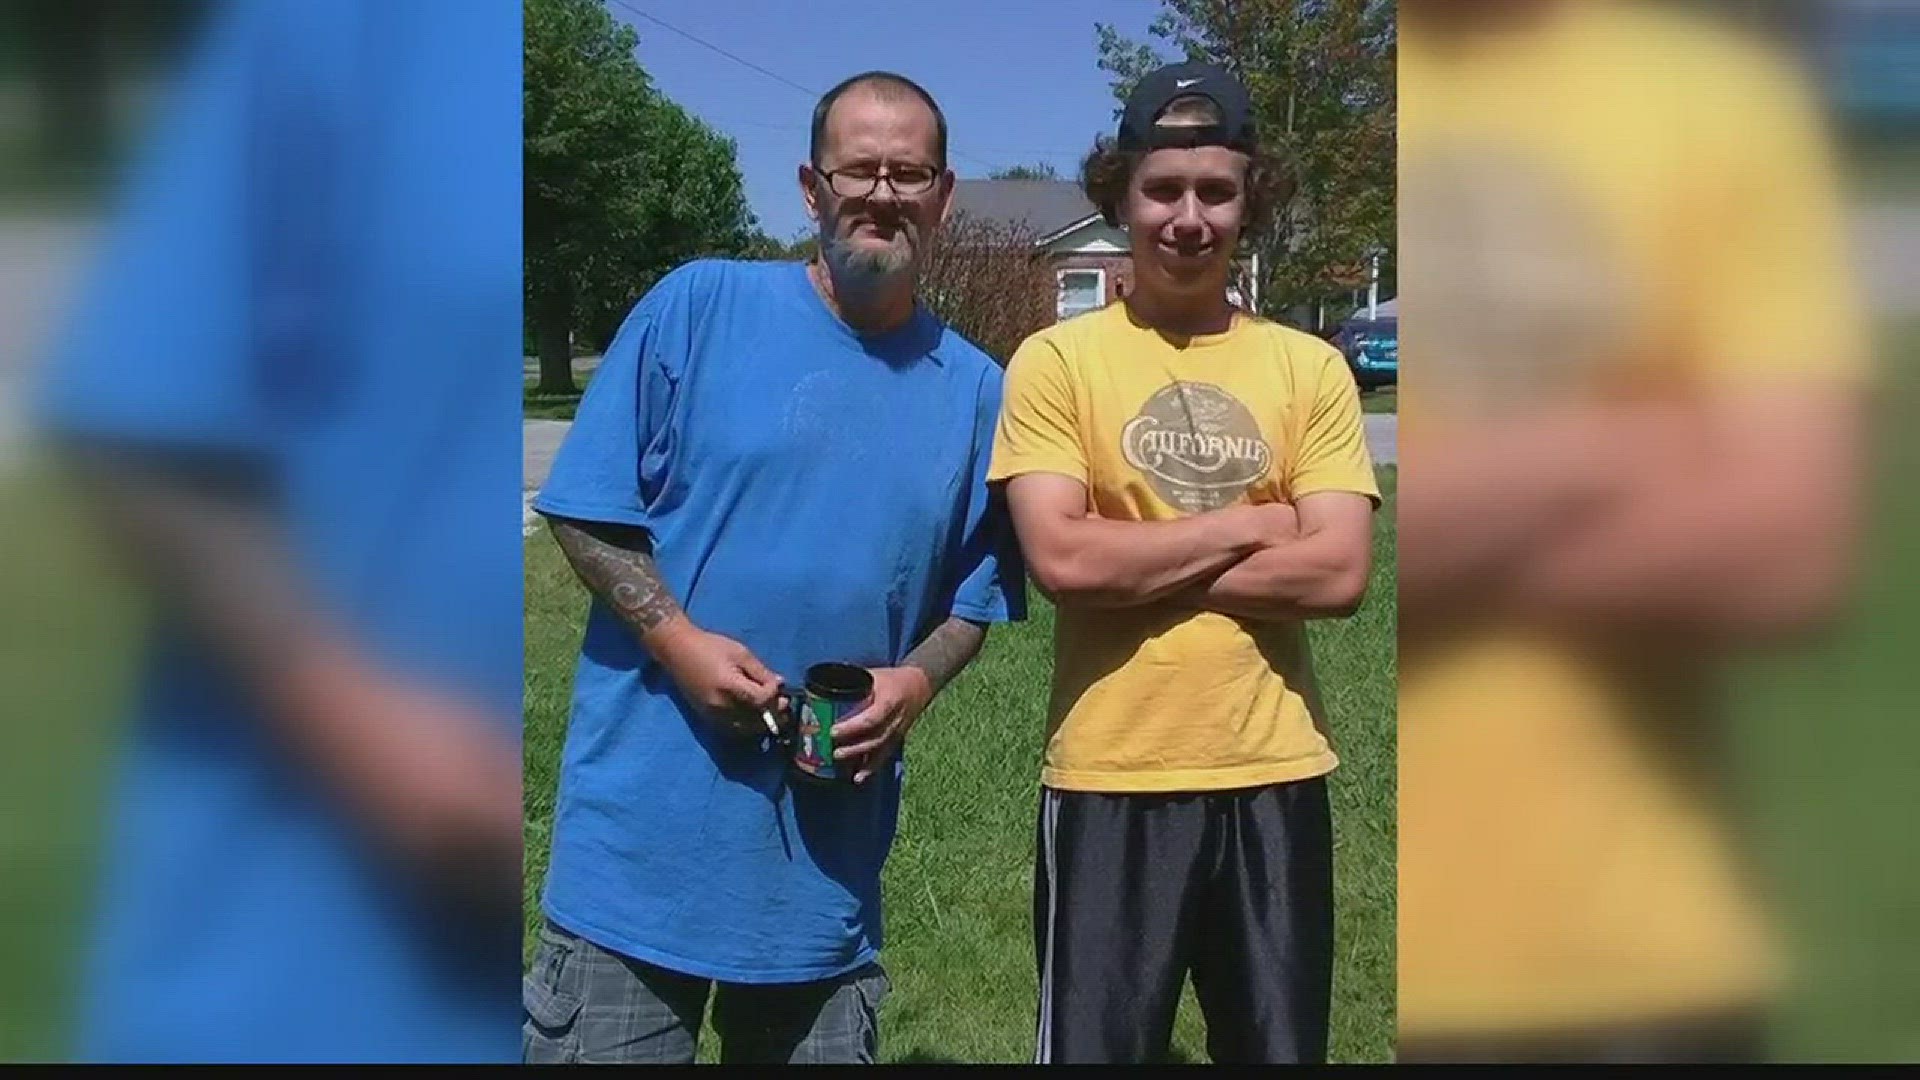 Last August, Stanley learned that his father, with stage 4 liver cancer, had less than six months to live and dying wish was to be reunited with his son. (Sep. 15, 2017)